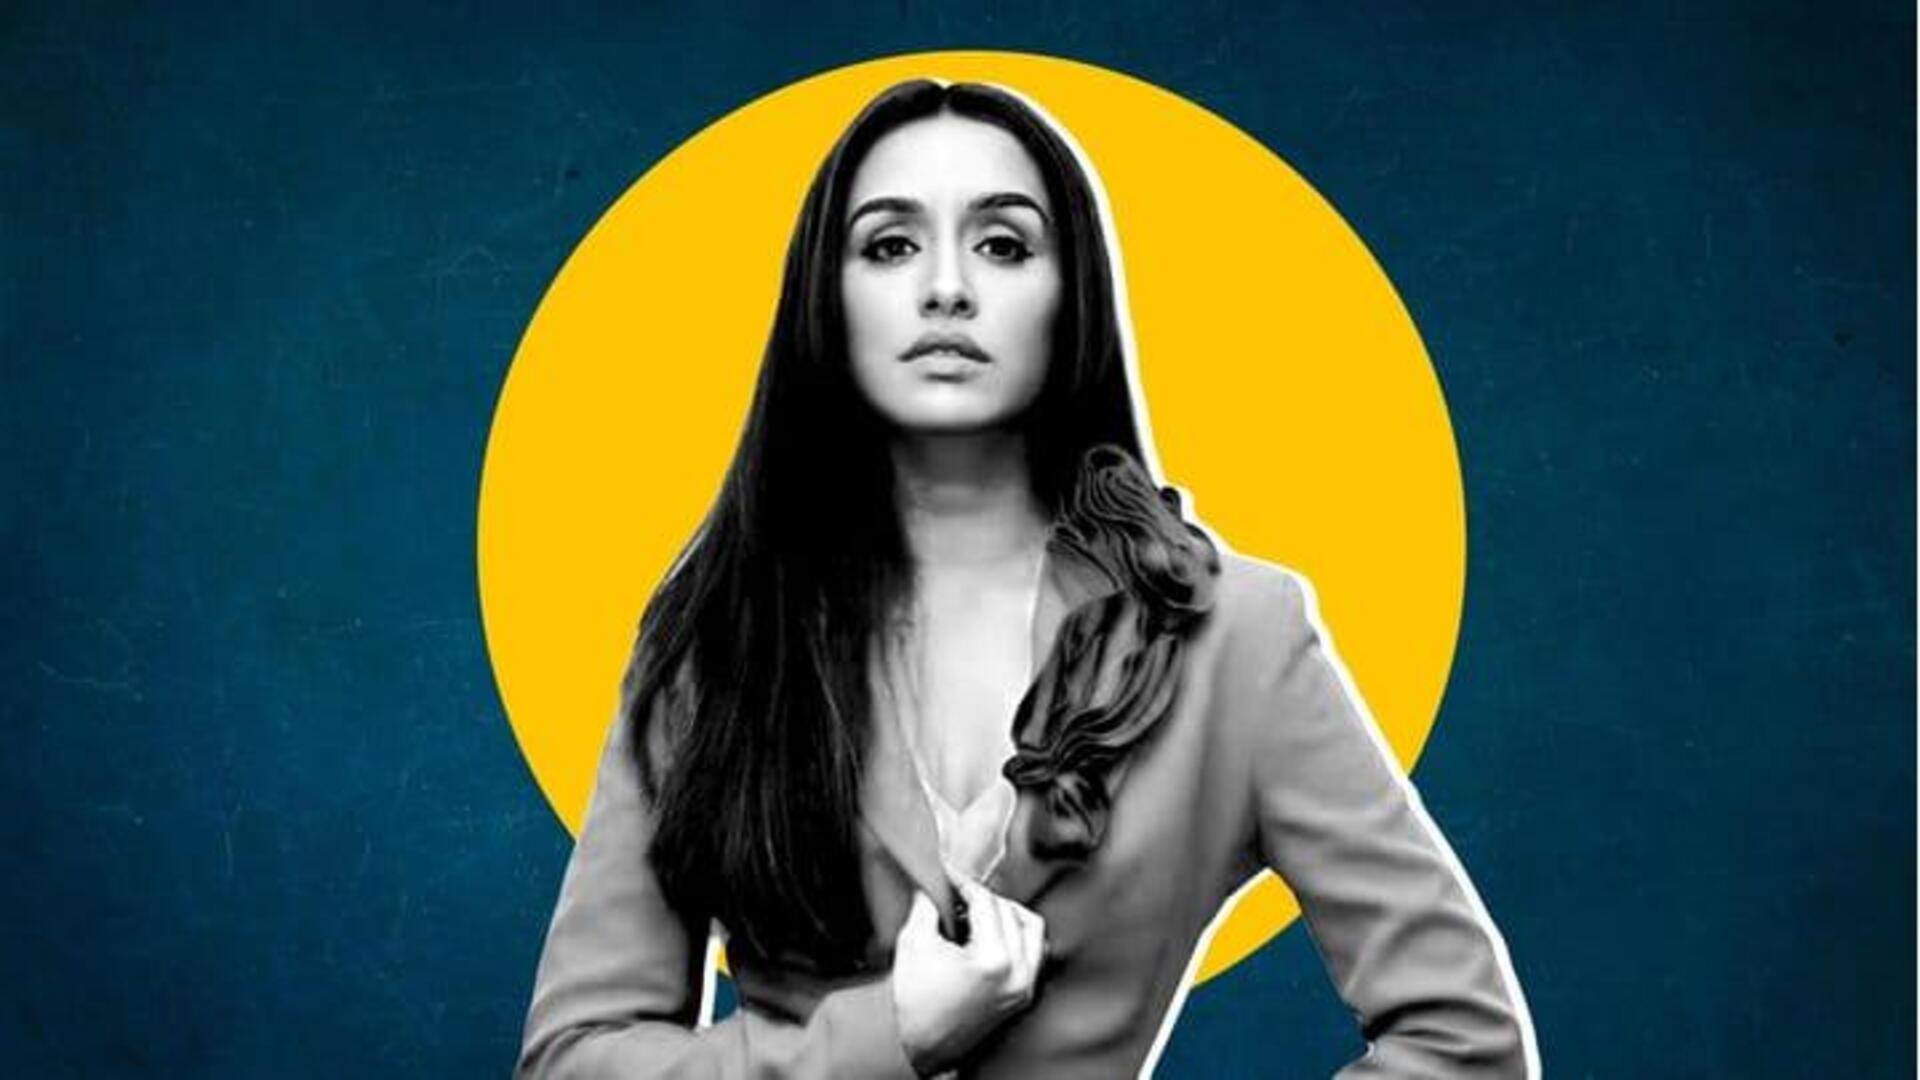 Mahadev betting scam: Shraddha Kapoor to appear before ED today